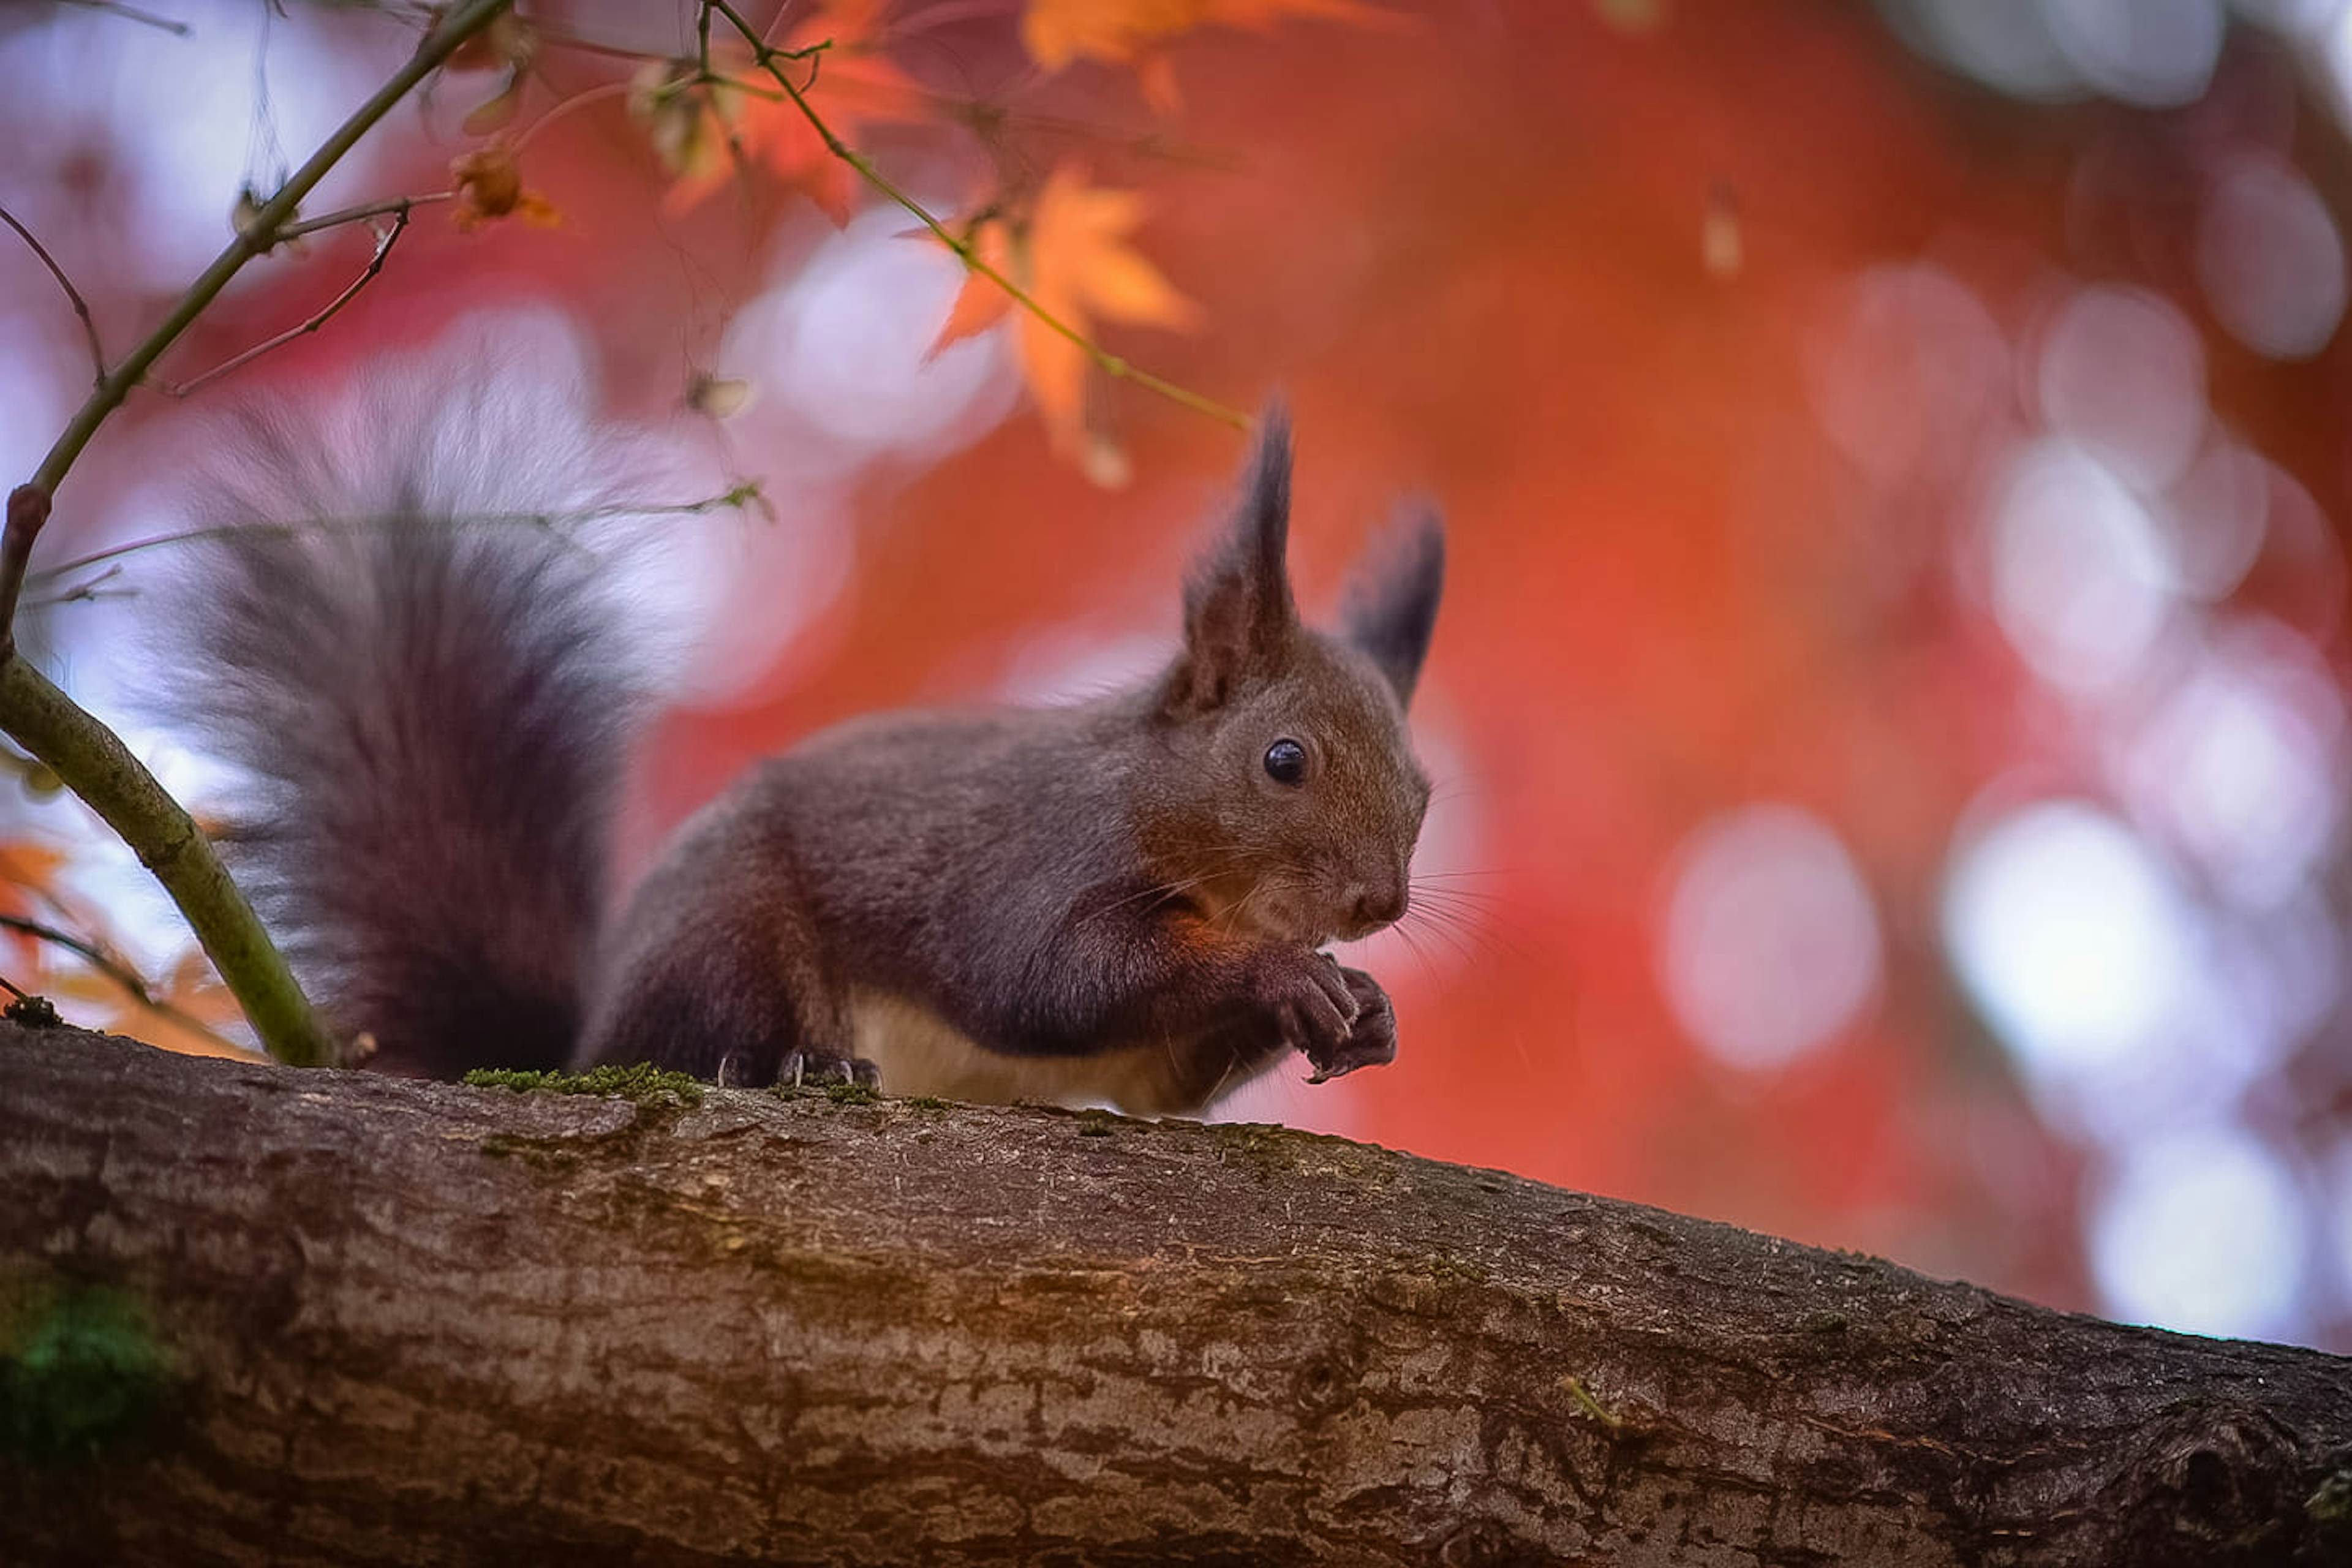 Explore Sofia's Park: Help a Lost Squirrel Find her Way Back Home